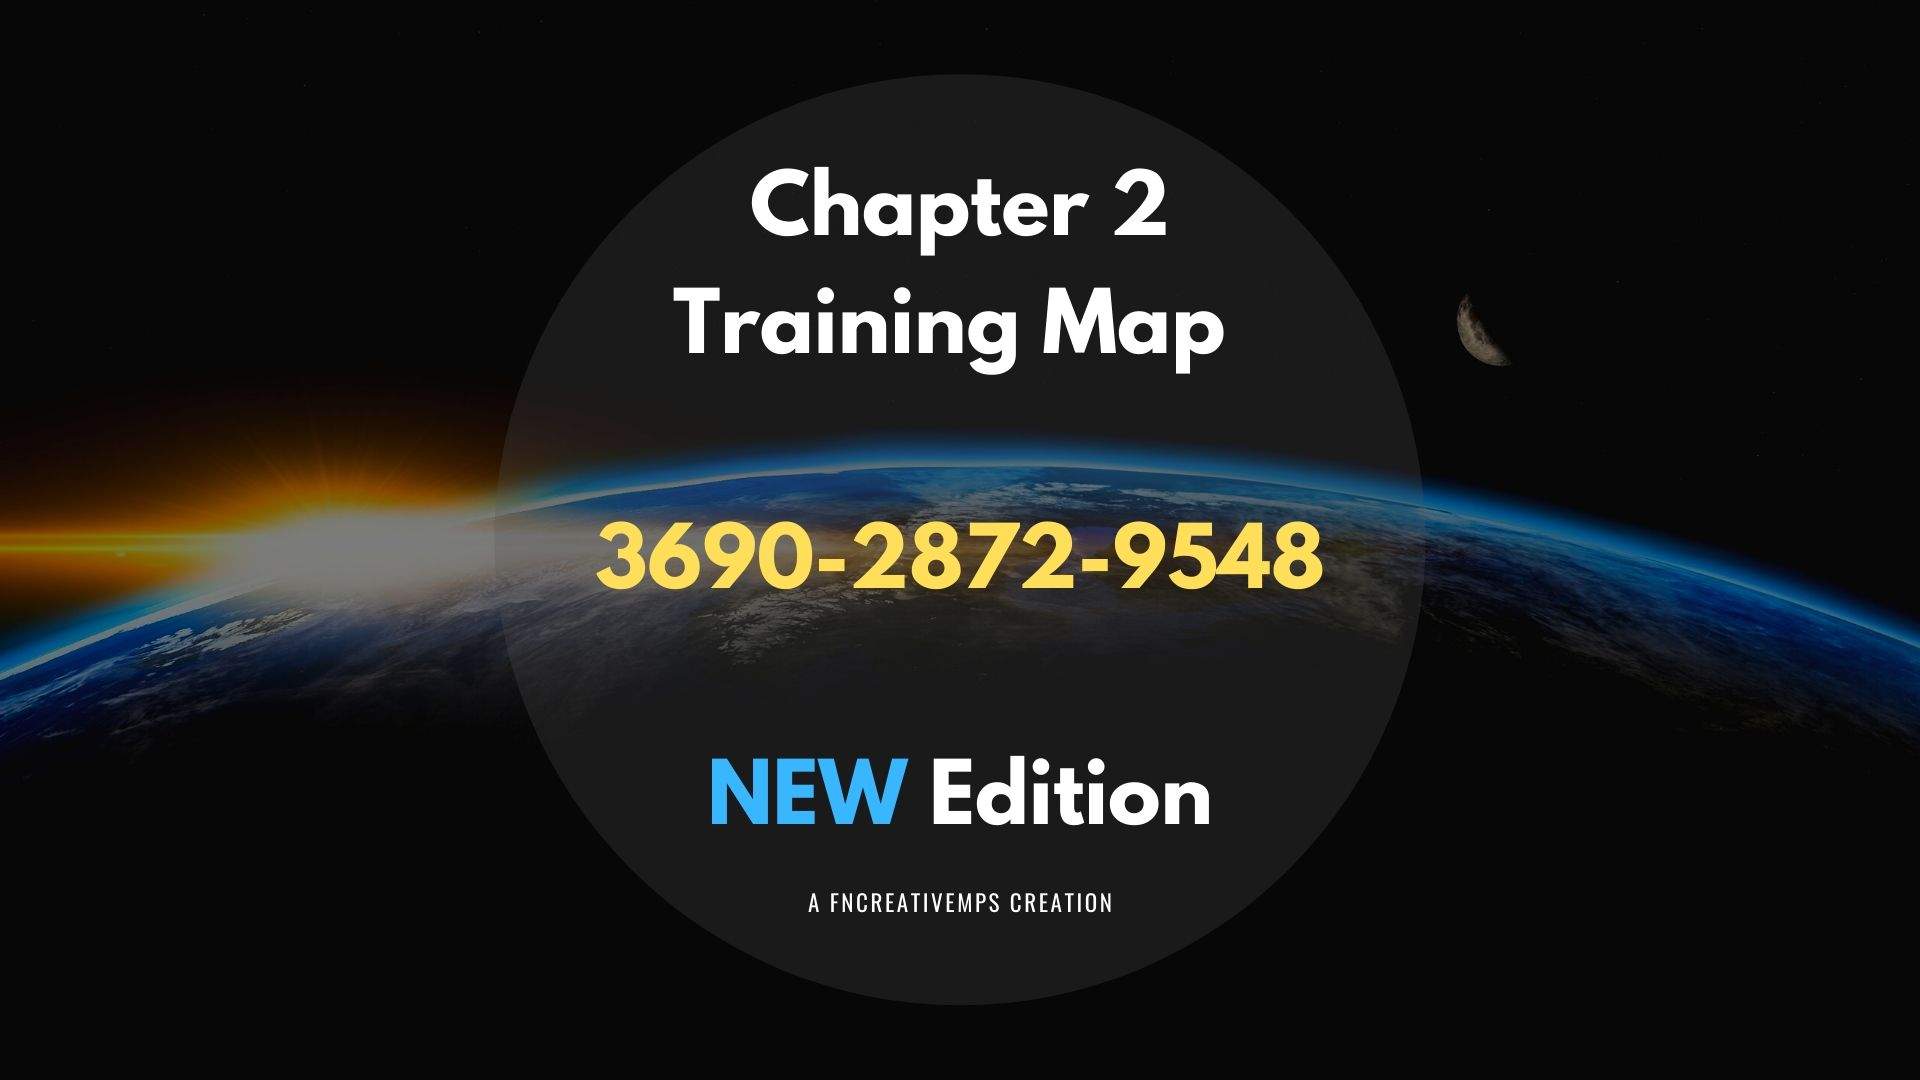 CHAPTER 2 TRAINING MAP - NEW EDITION